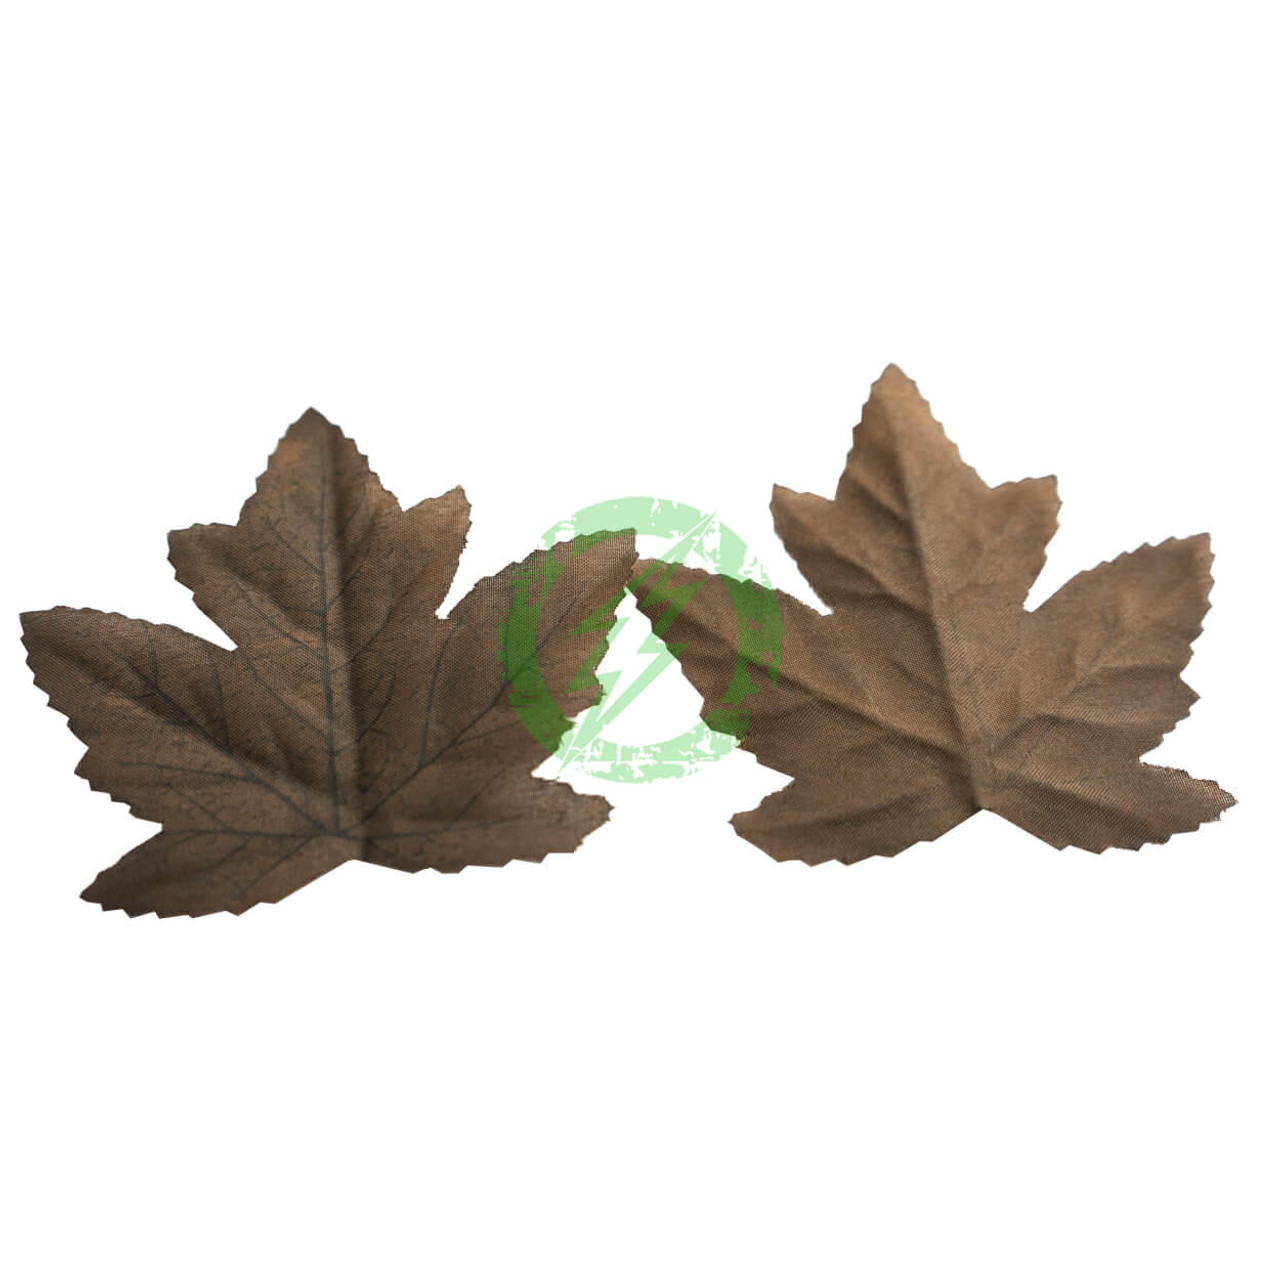  Unique Leaves Single Maple Crafting Leaves | Pack of 50 